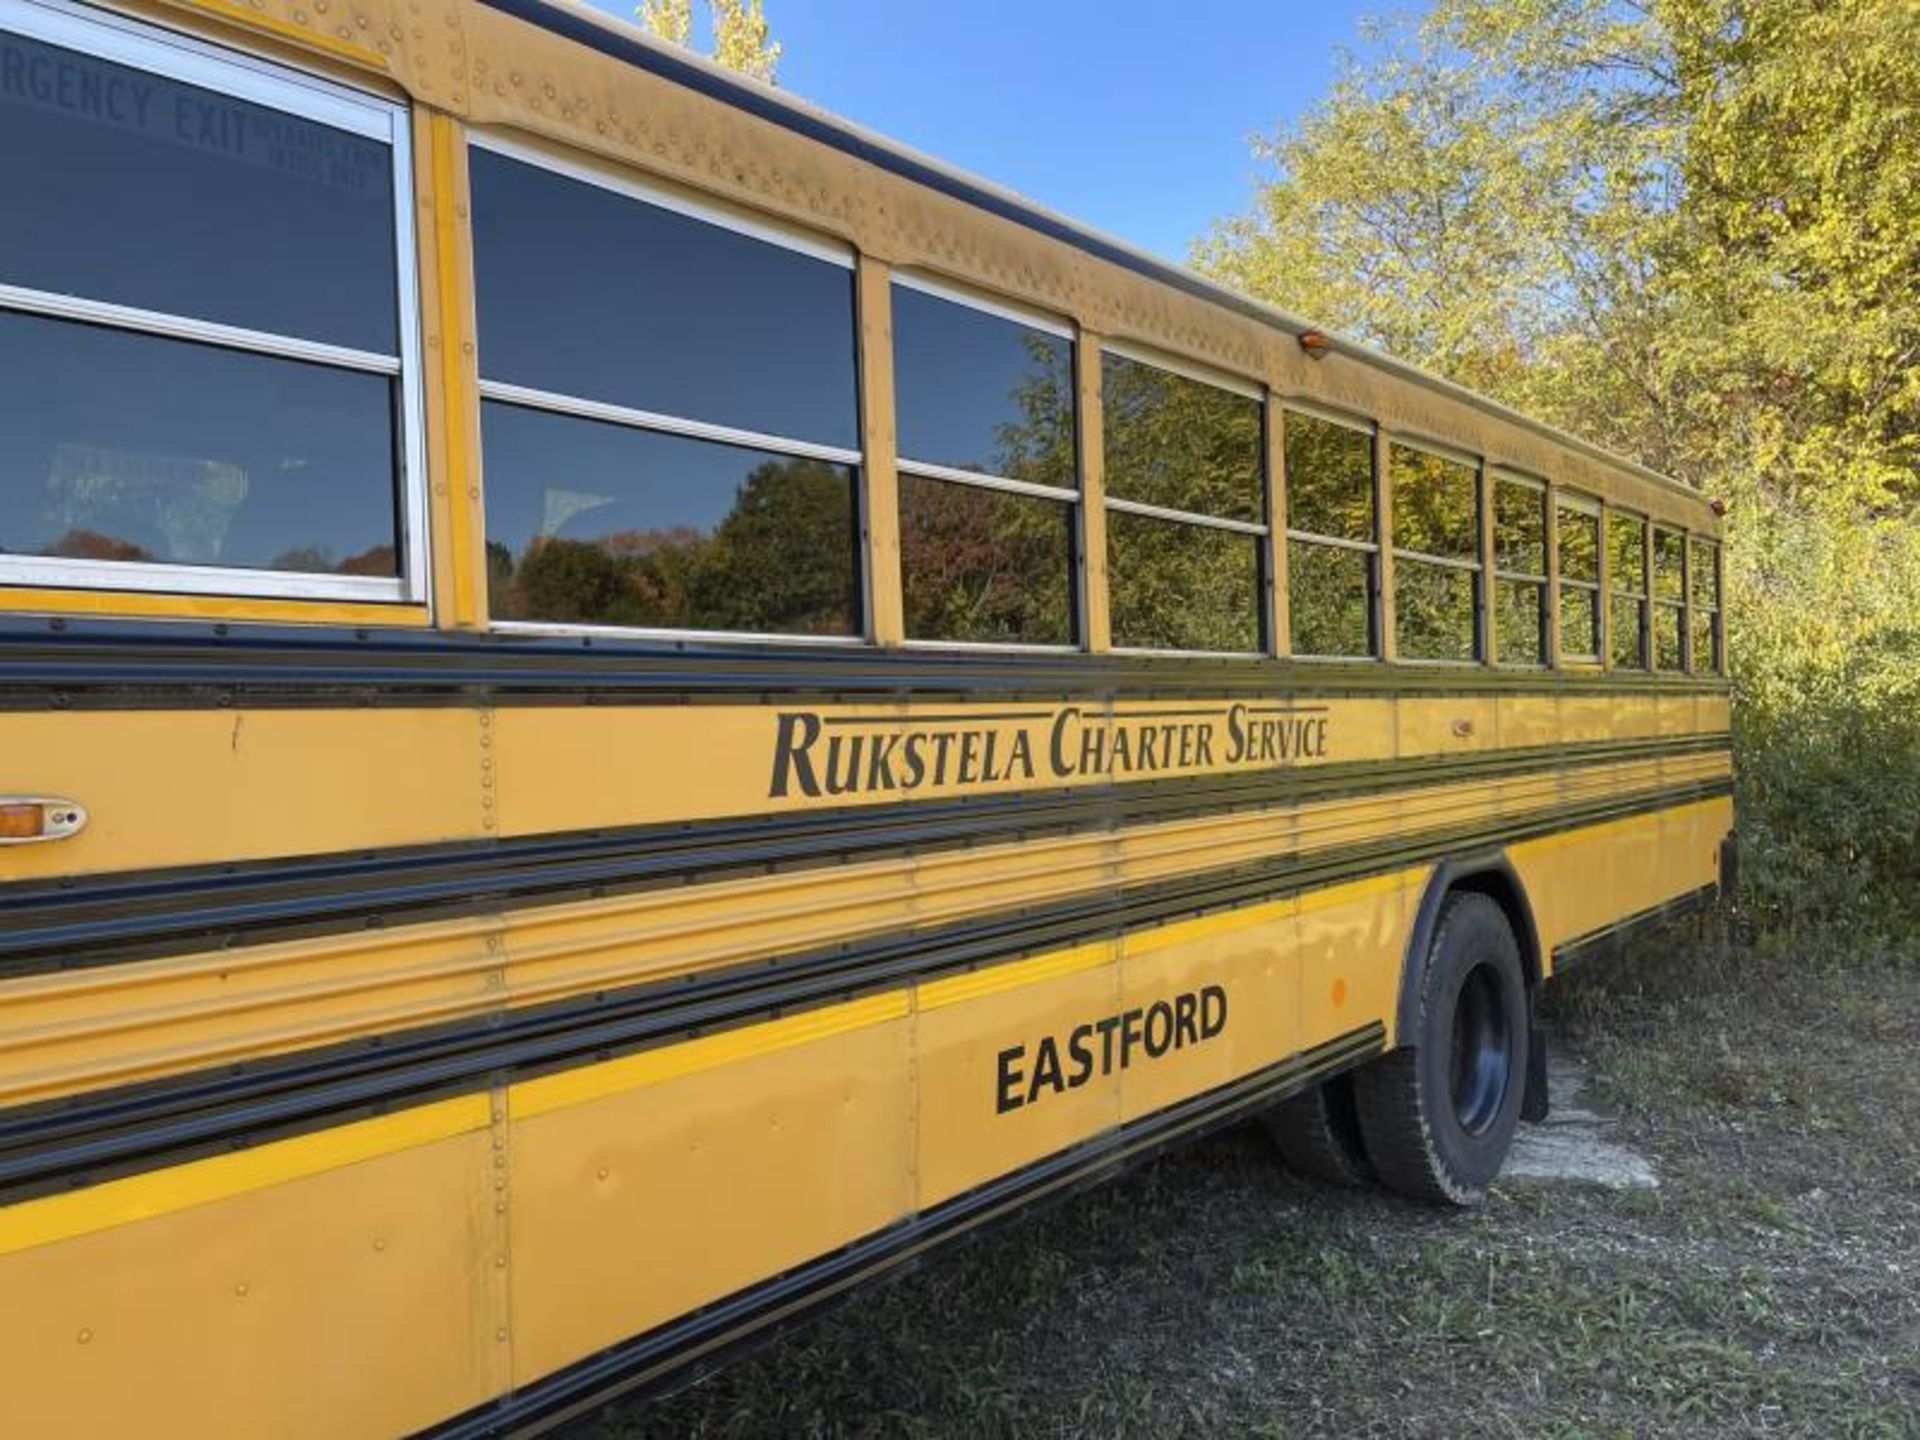 2011 Blue Bird Bus, Odometer Reads 193,151, Engine Starts, New Batteries, VIN: 1BAKGCPA9BF278622 - Image 6 of 40